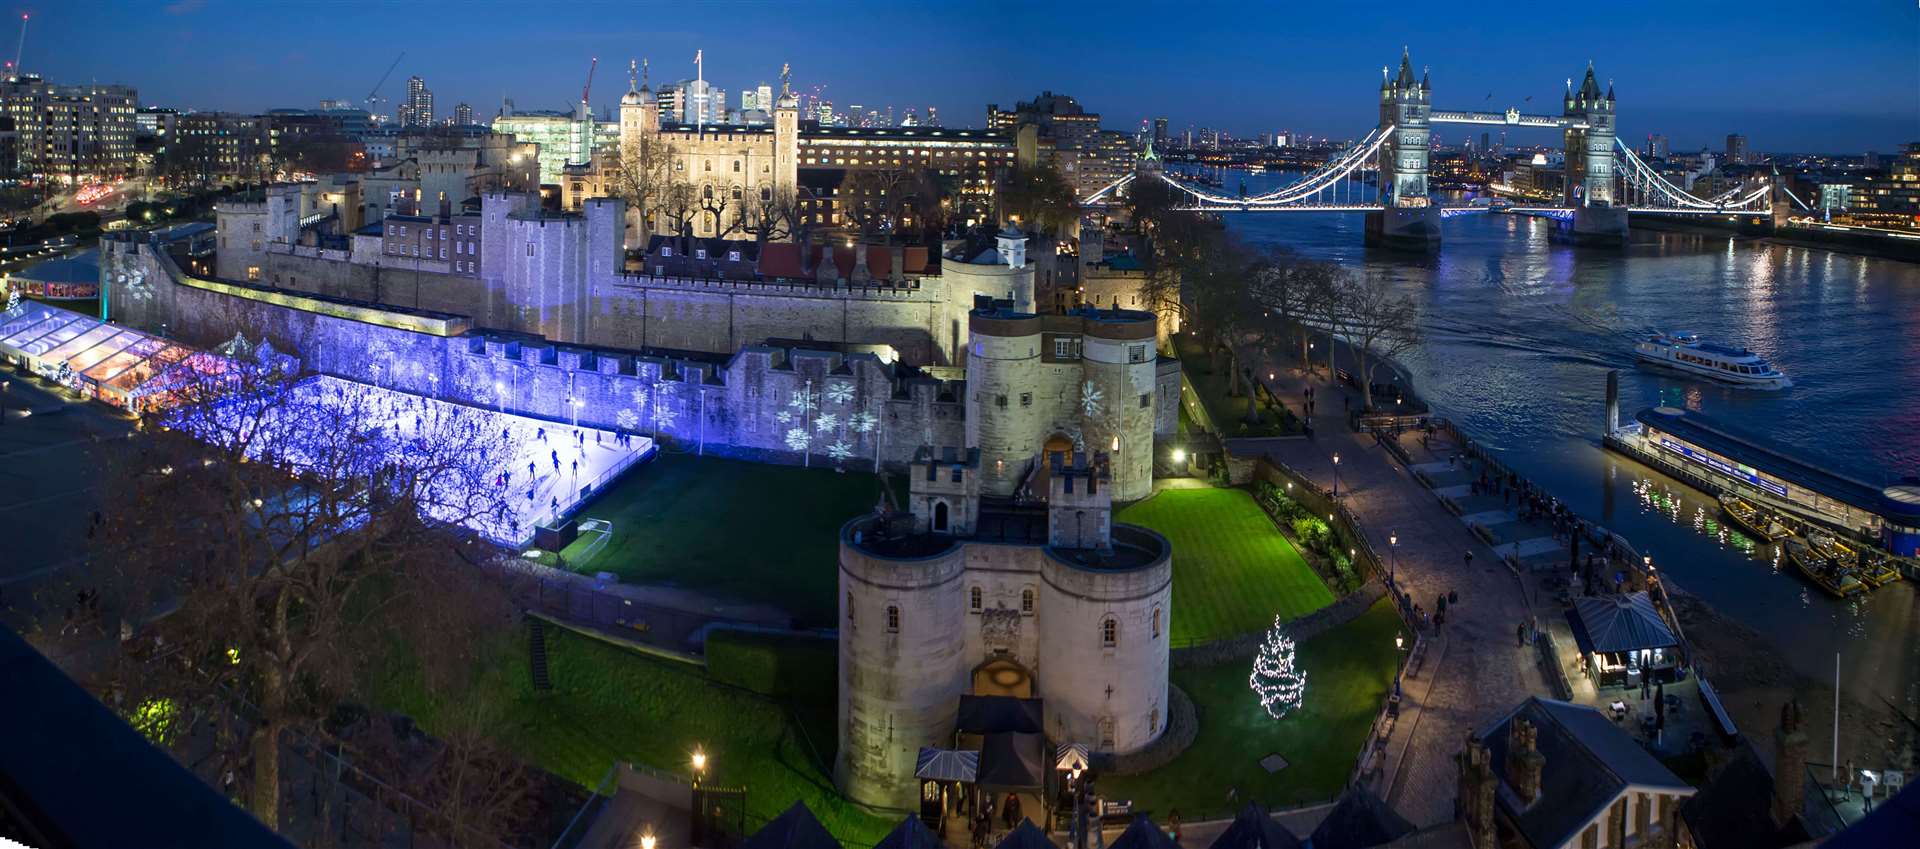 The Tower of London will have a bigger ice rink this year